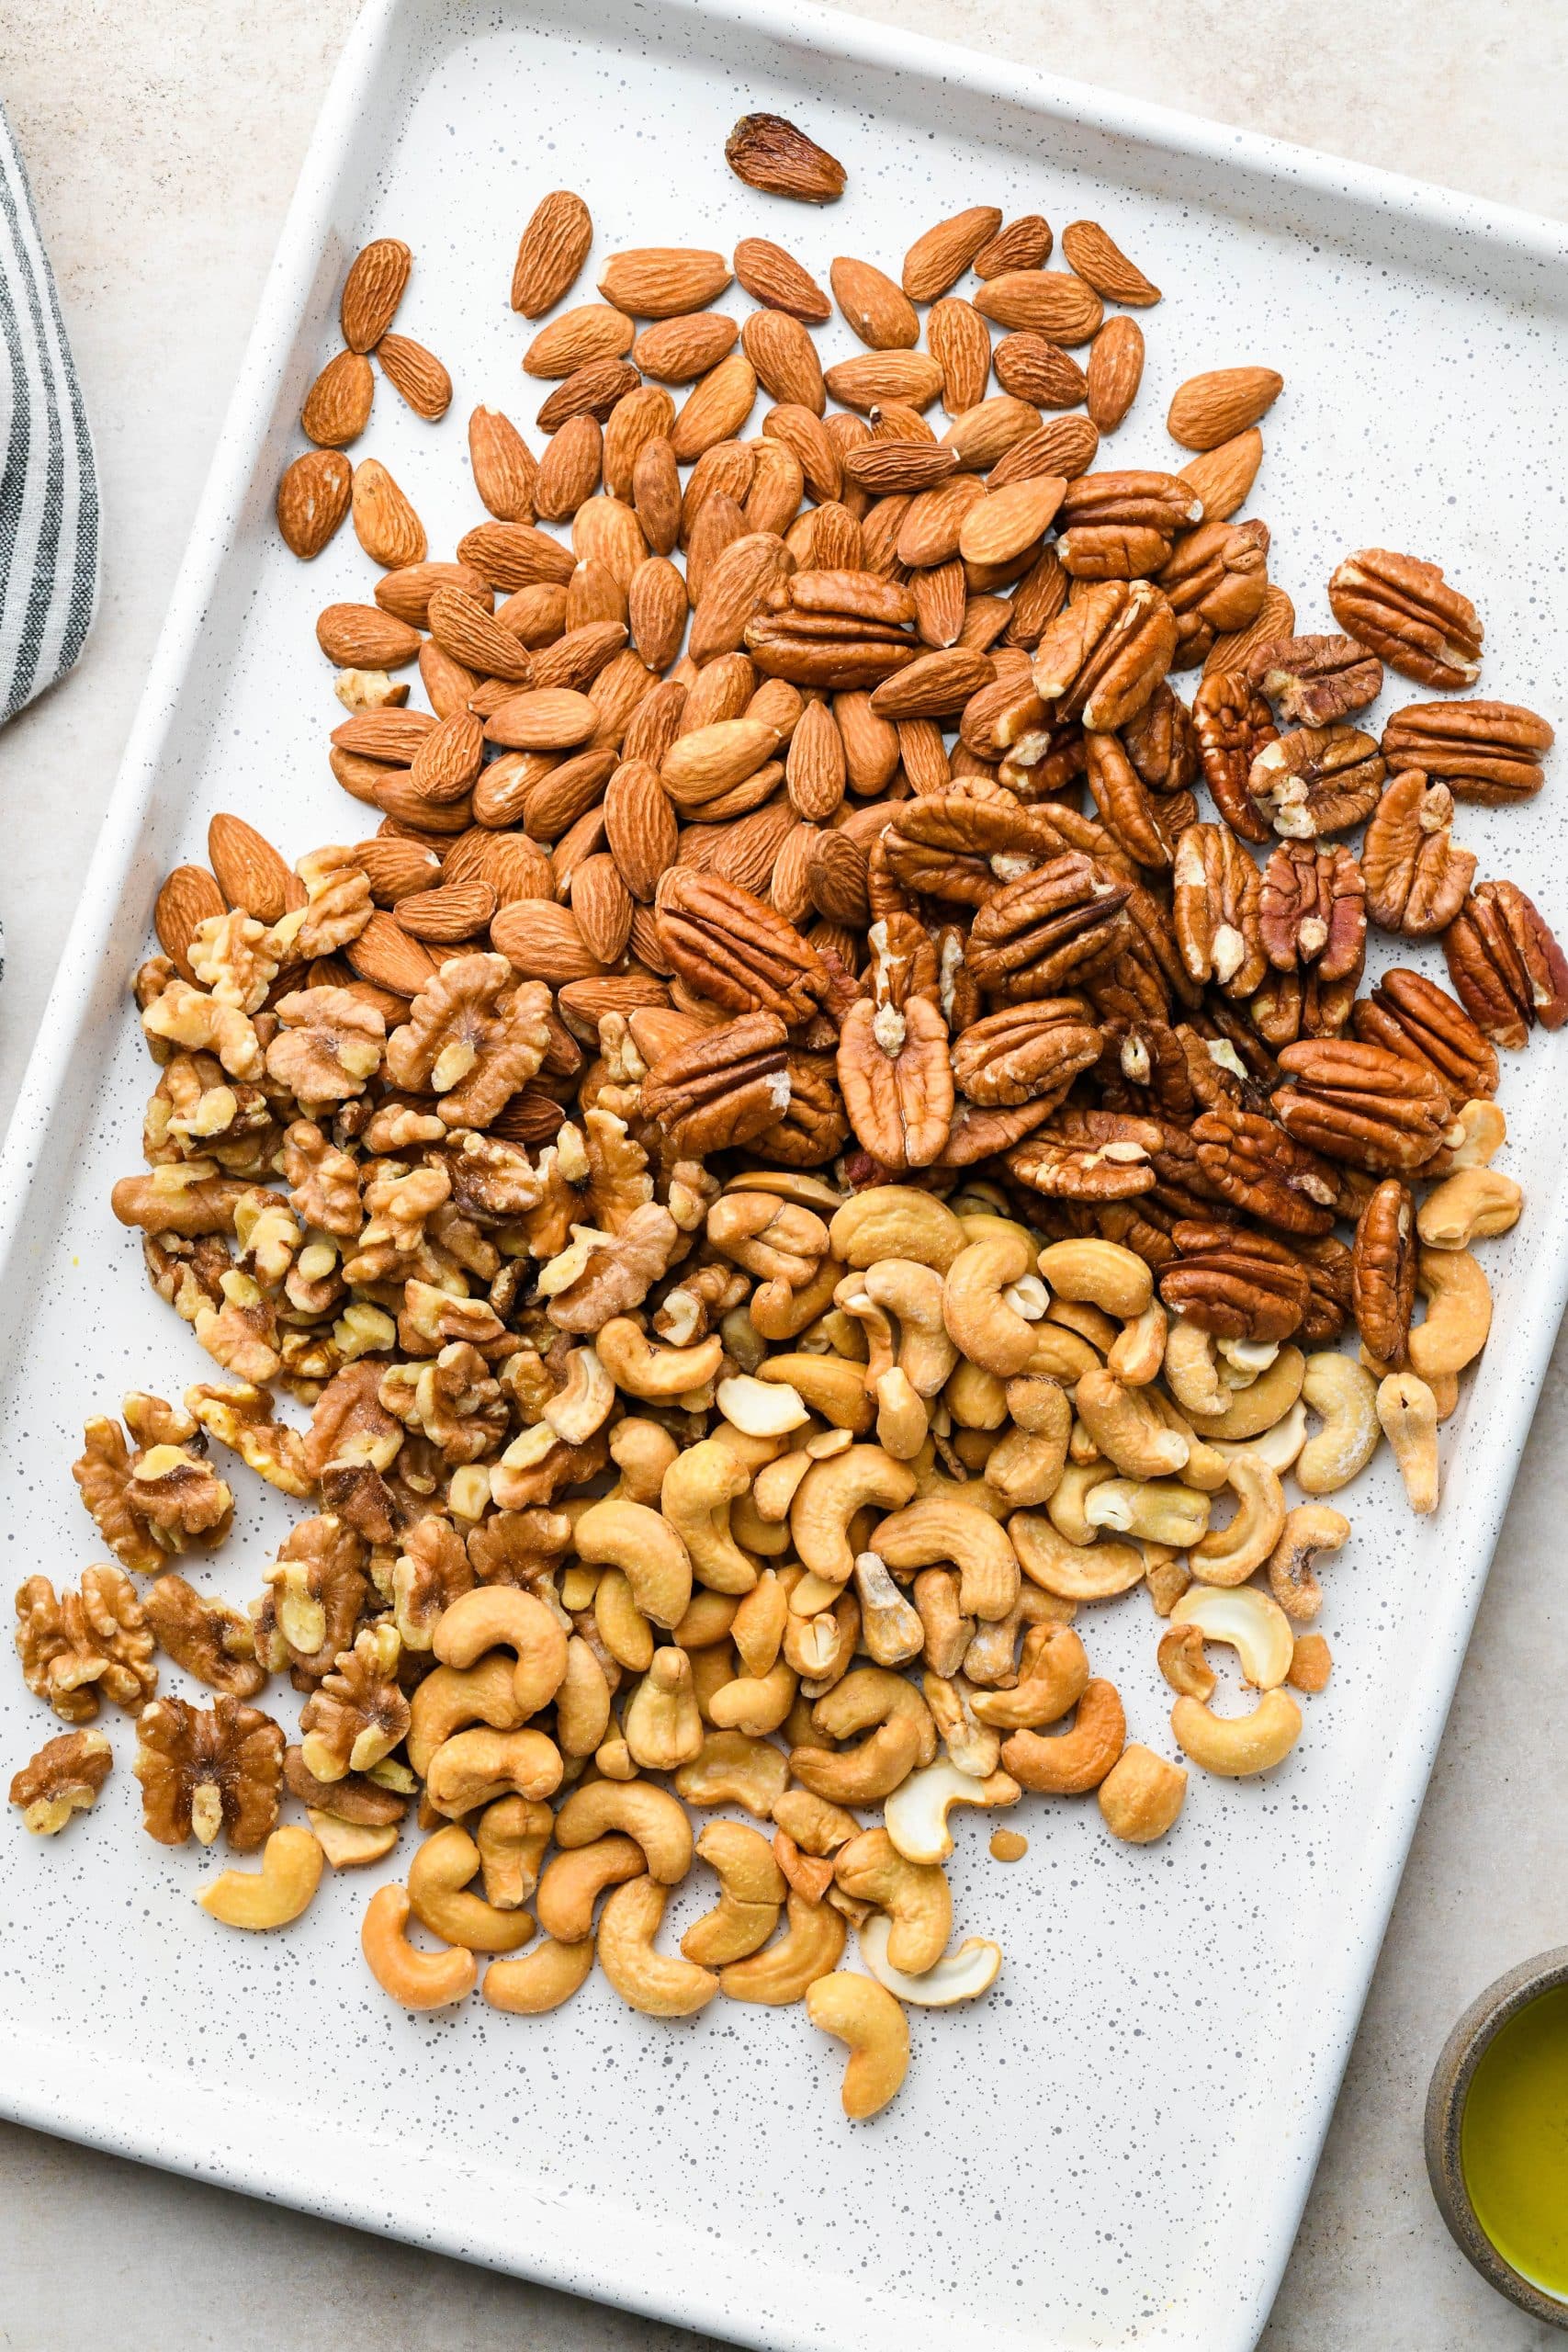 How to make Spiced Roasted Nuts: Mixed nuts spread out on a baking sheet.